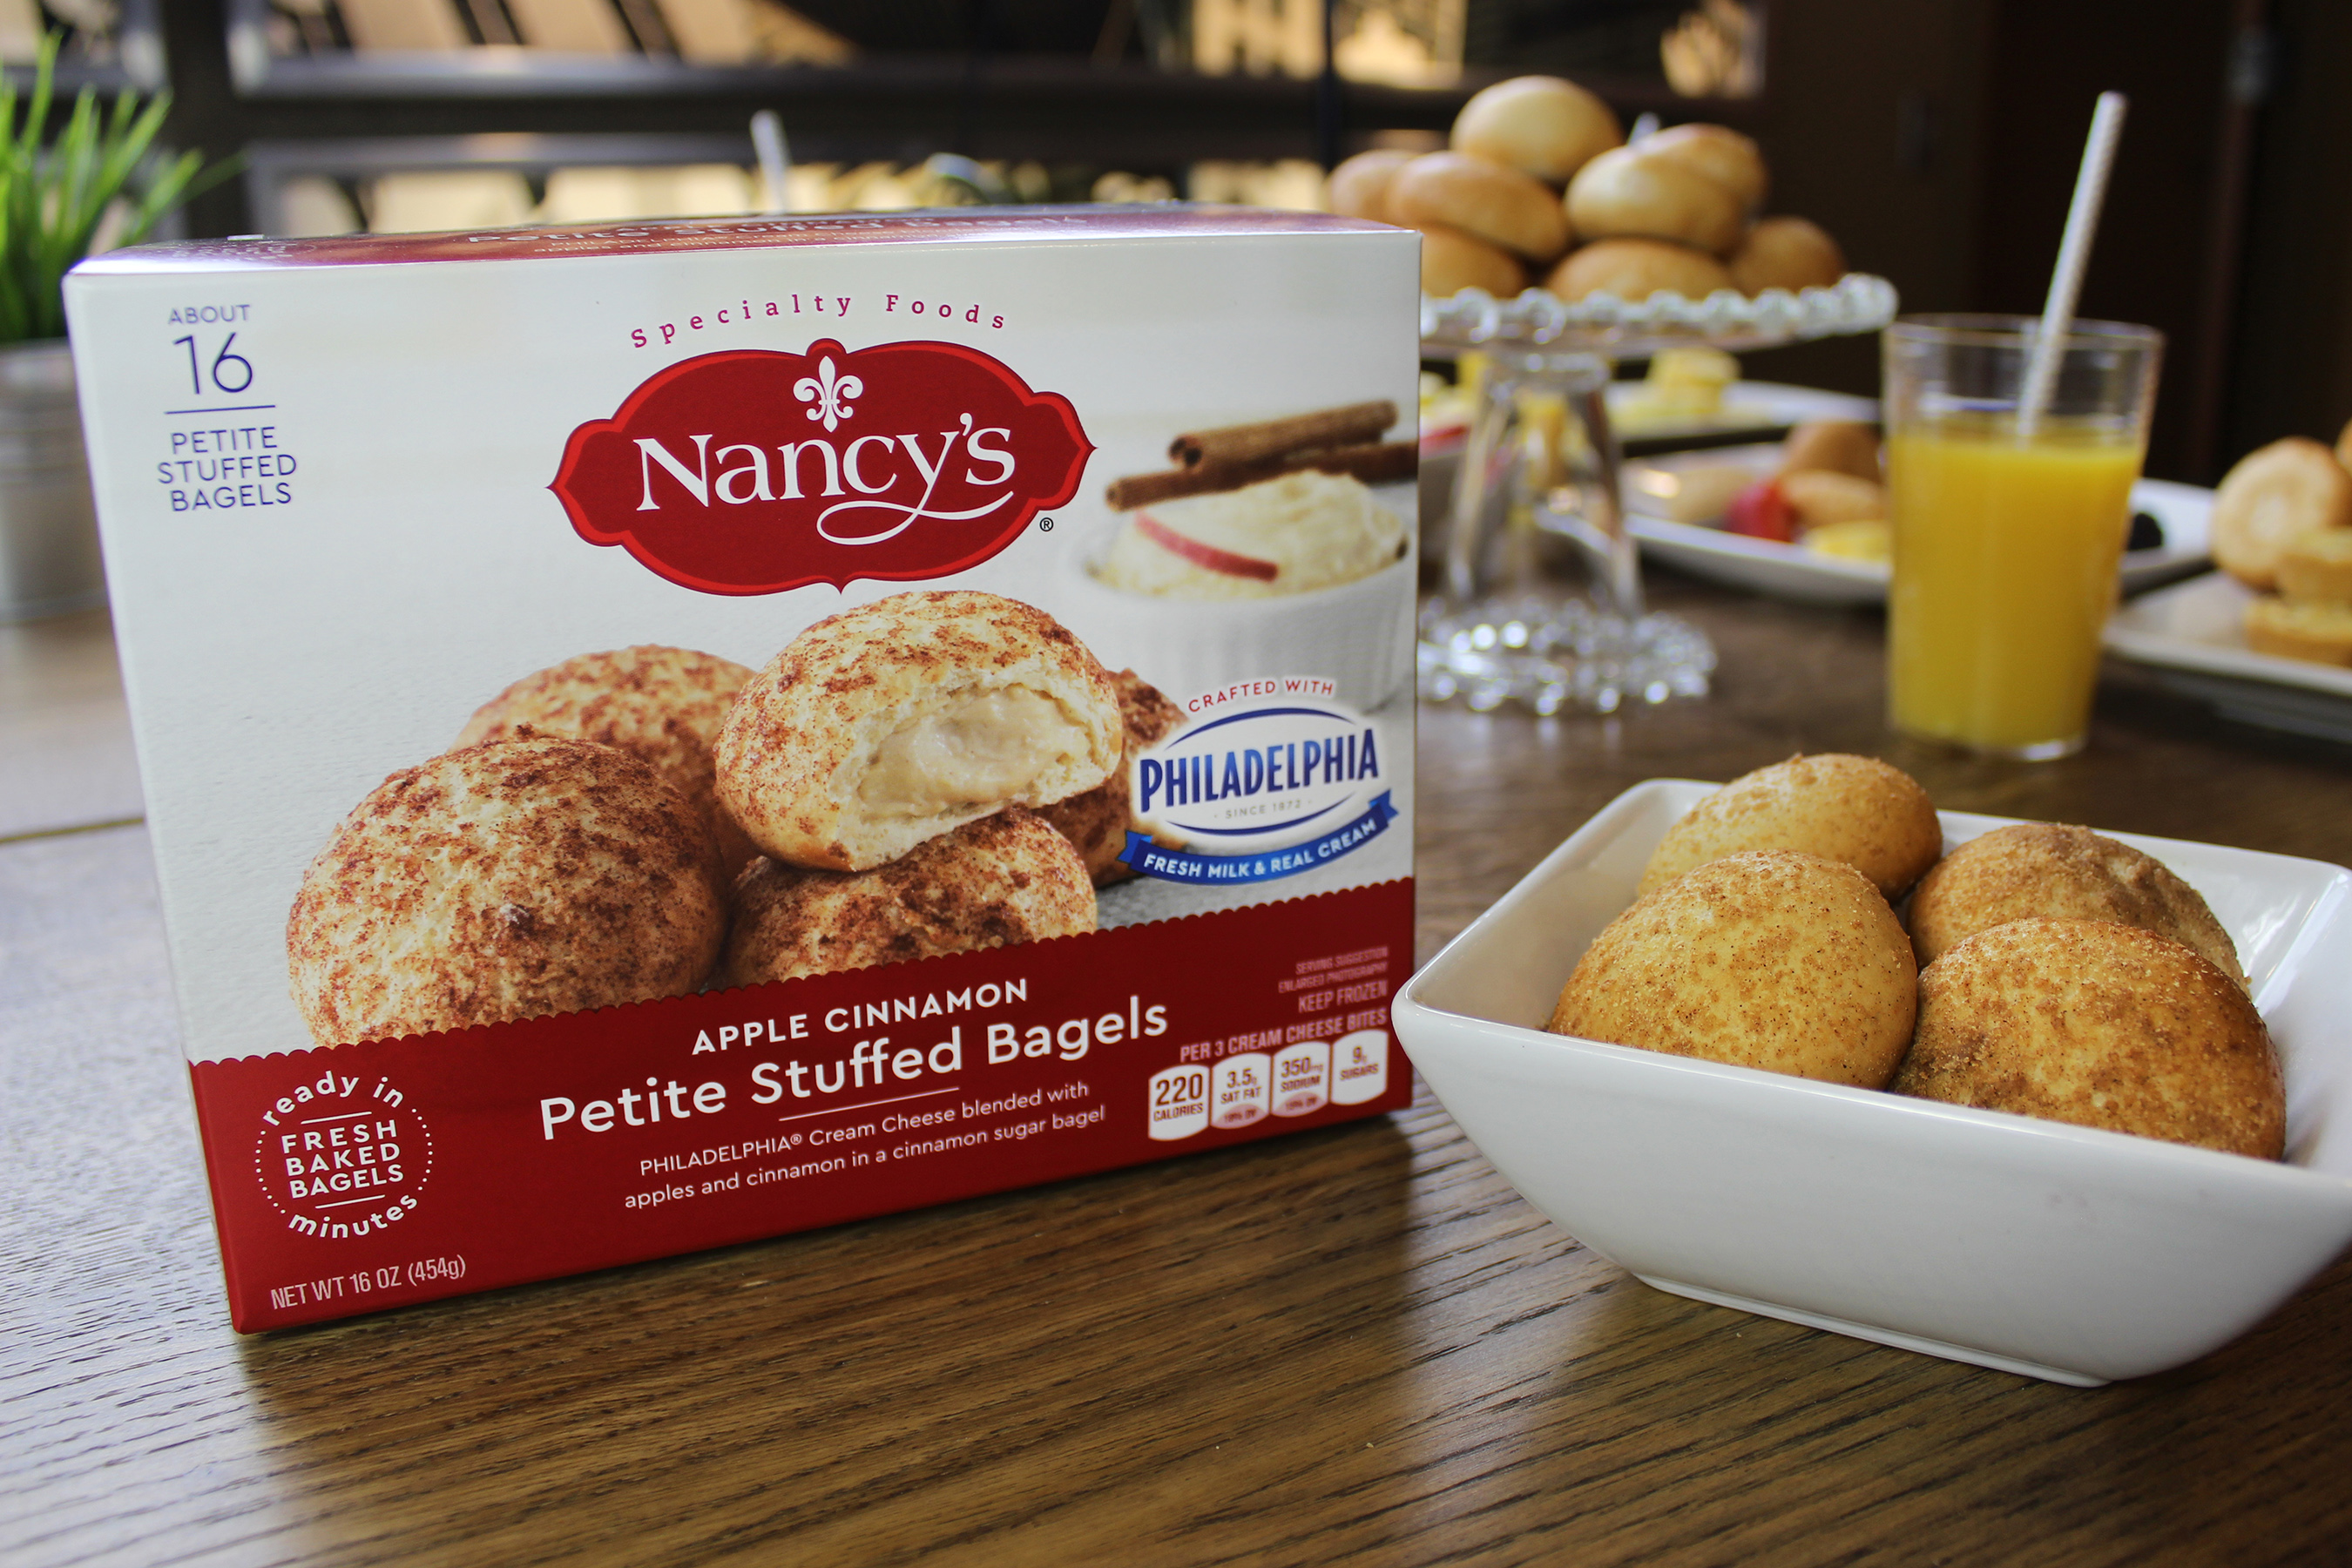 Embrace the holiday season with Nancy's Petite Stuffed Apple Cinnamon Bagels made with PHILADELPHIA Cream Cheese blended with apples and cinnamon in a cinnamon sugar bagel